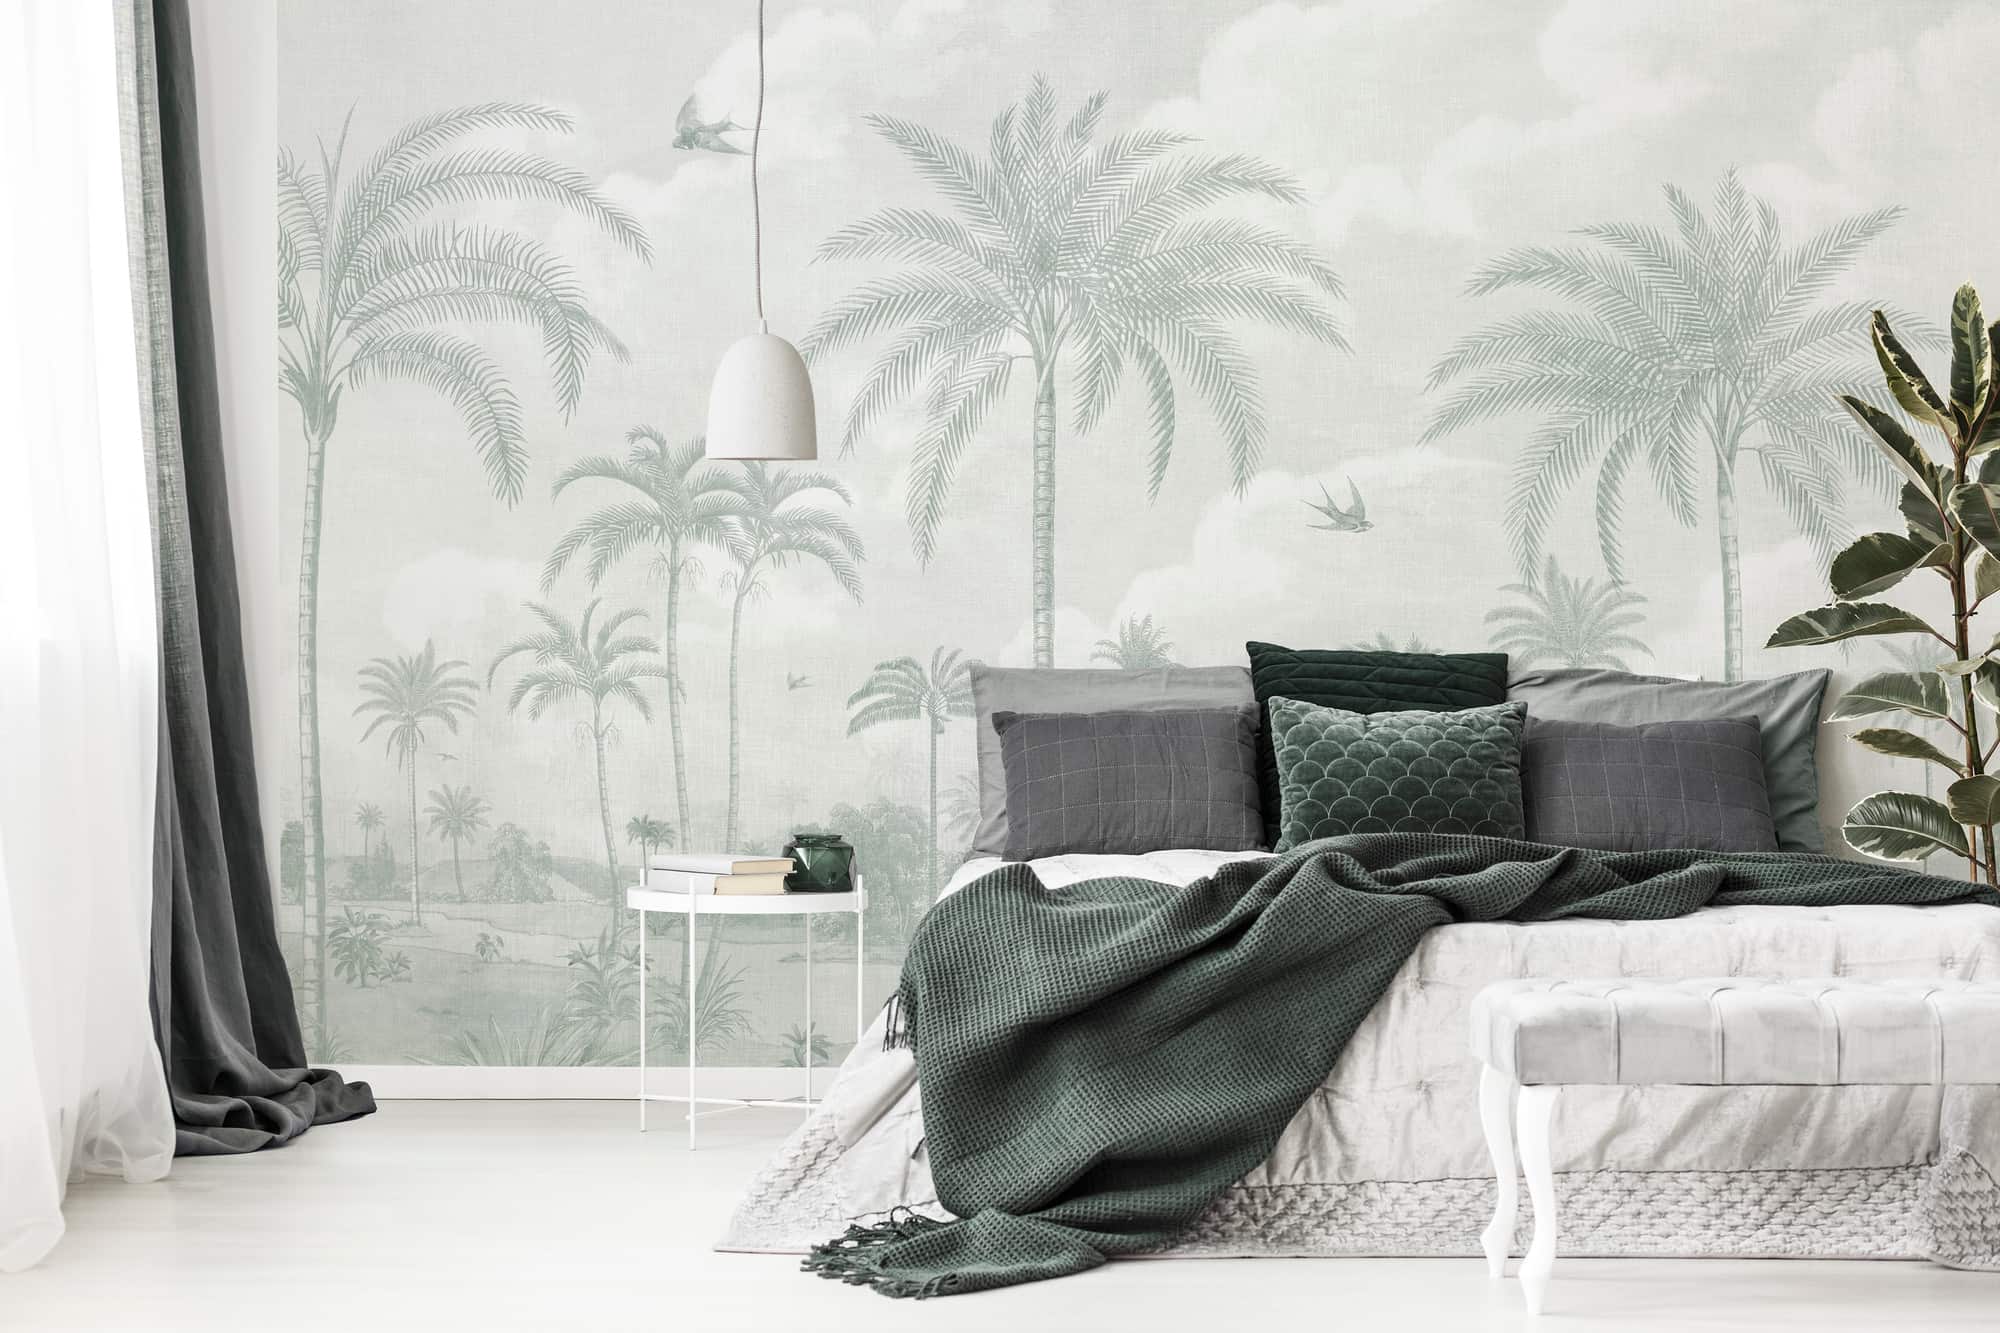 palm tree prints on wallpaper giving a natural touch to your decor, hanging light hanged over the bed, minimal bed room decor